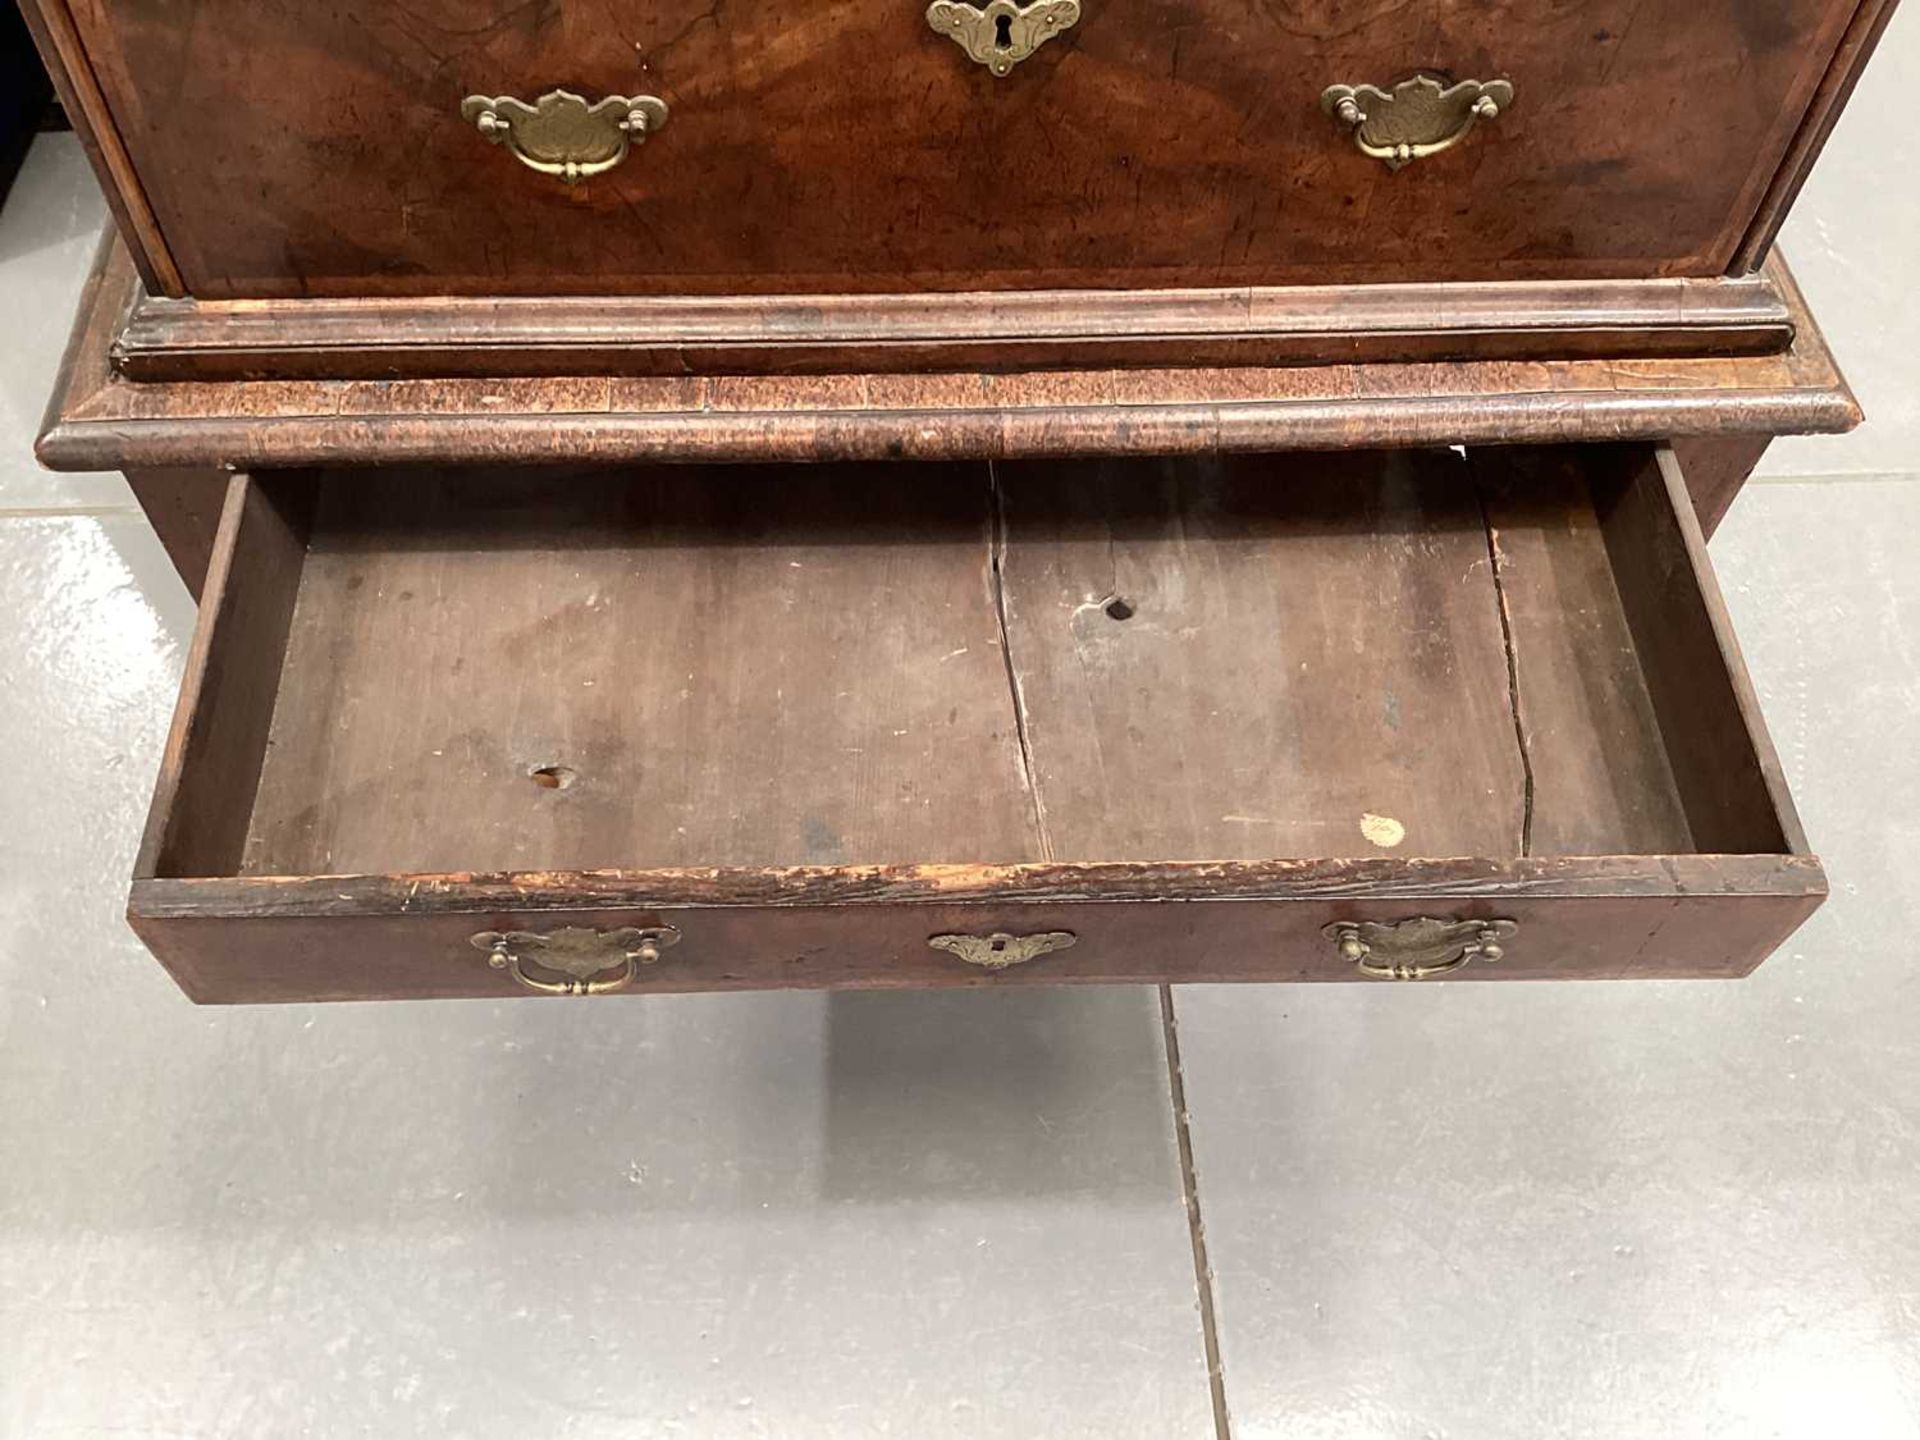 A 17th-century and later figured walnut chest on stand, the upper section with quarter veneered top  - Image 22 of 22